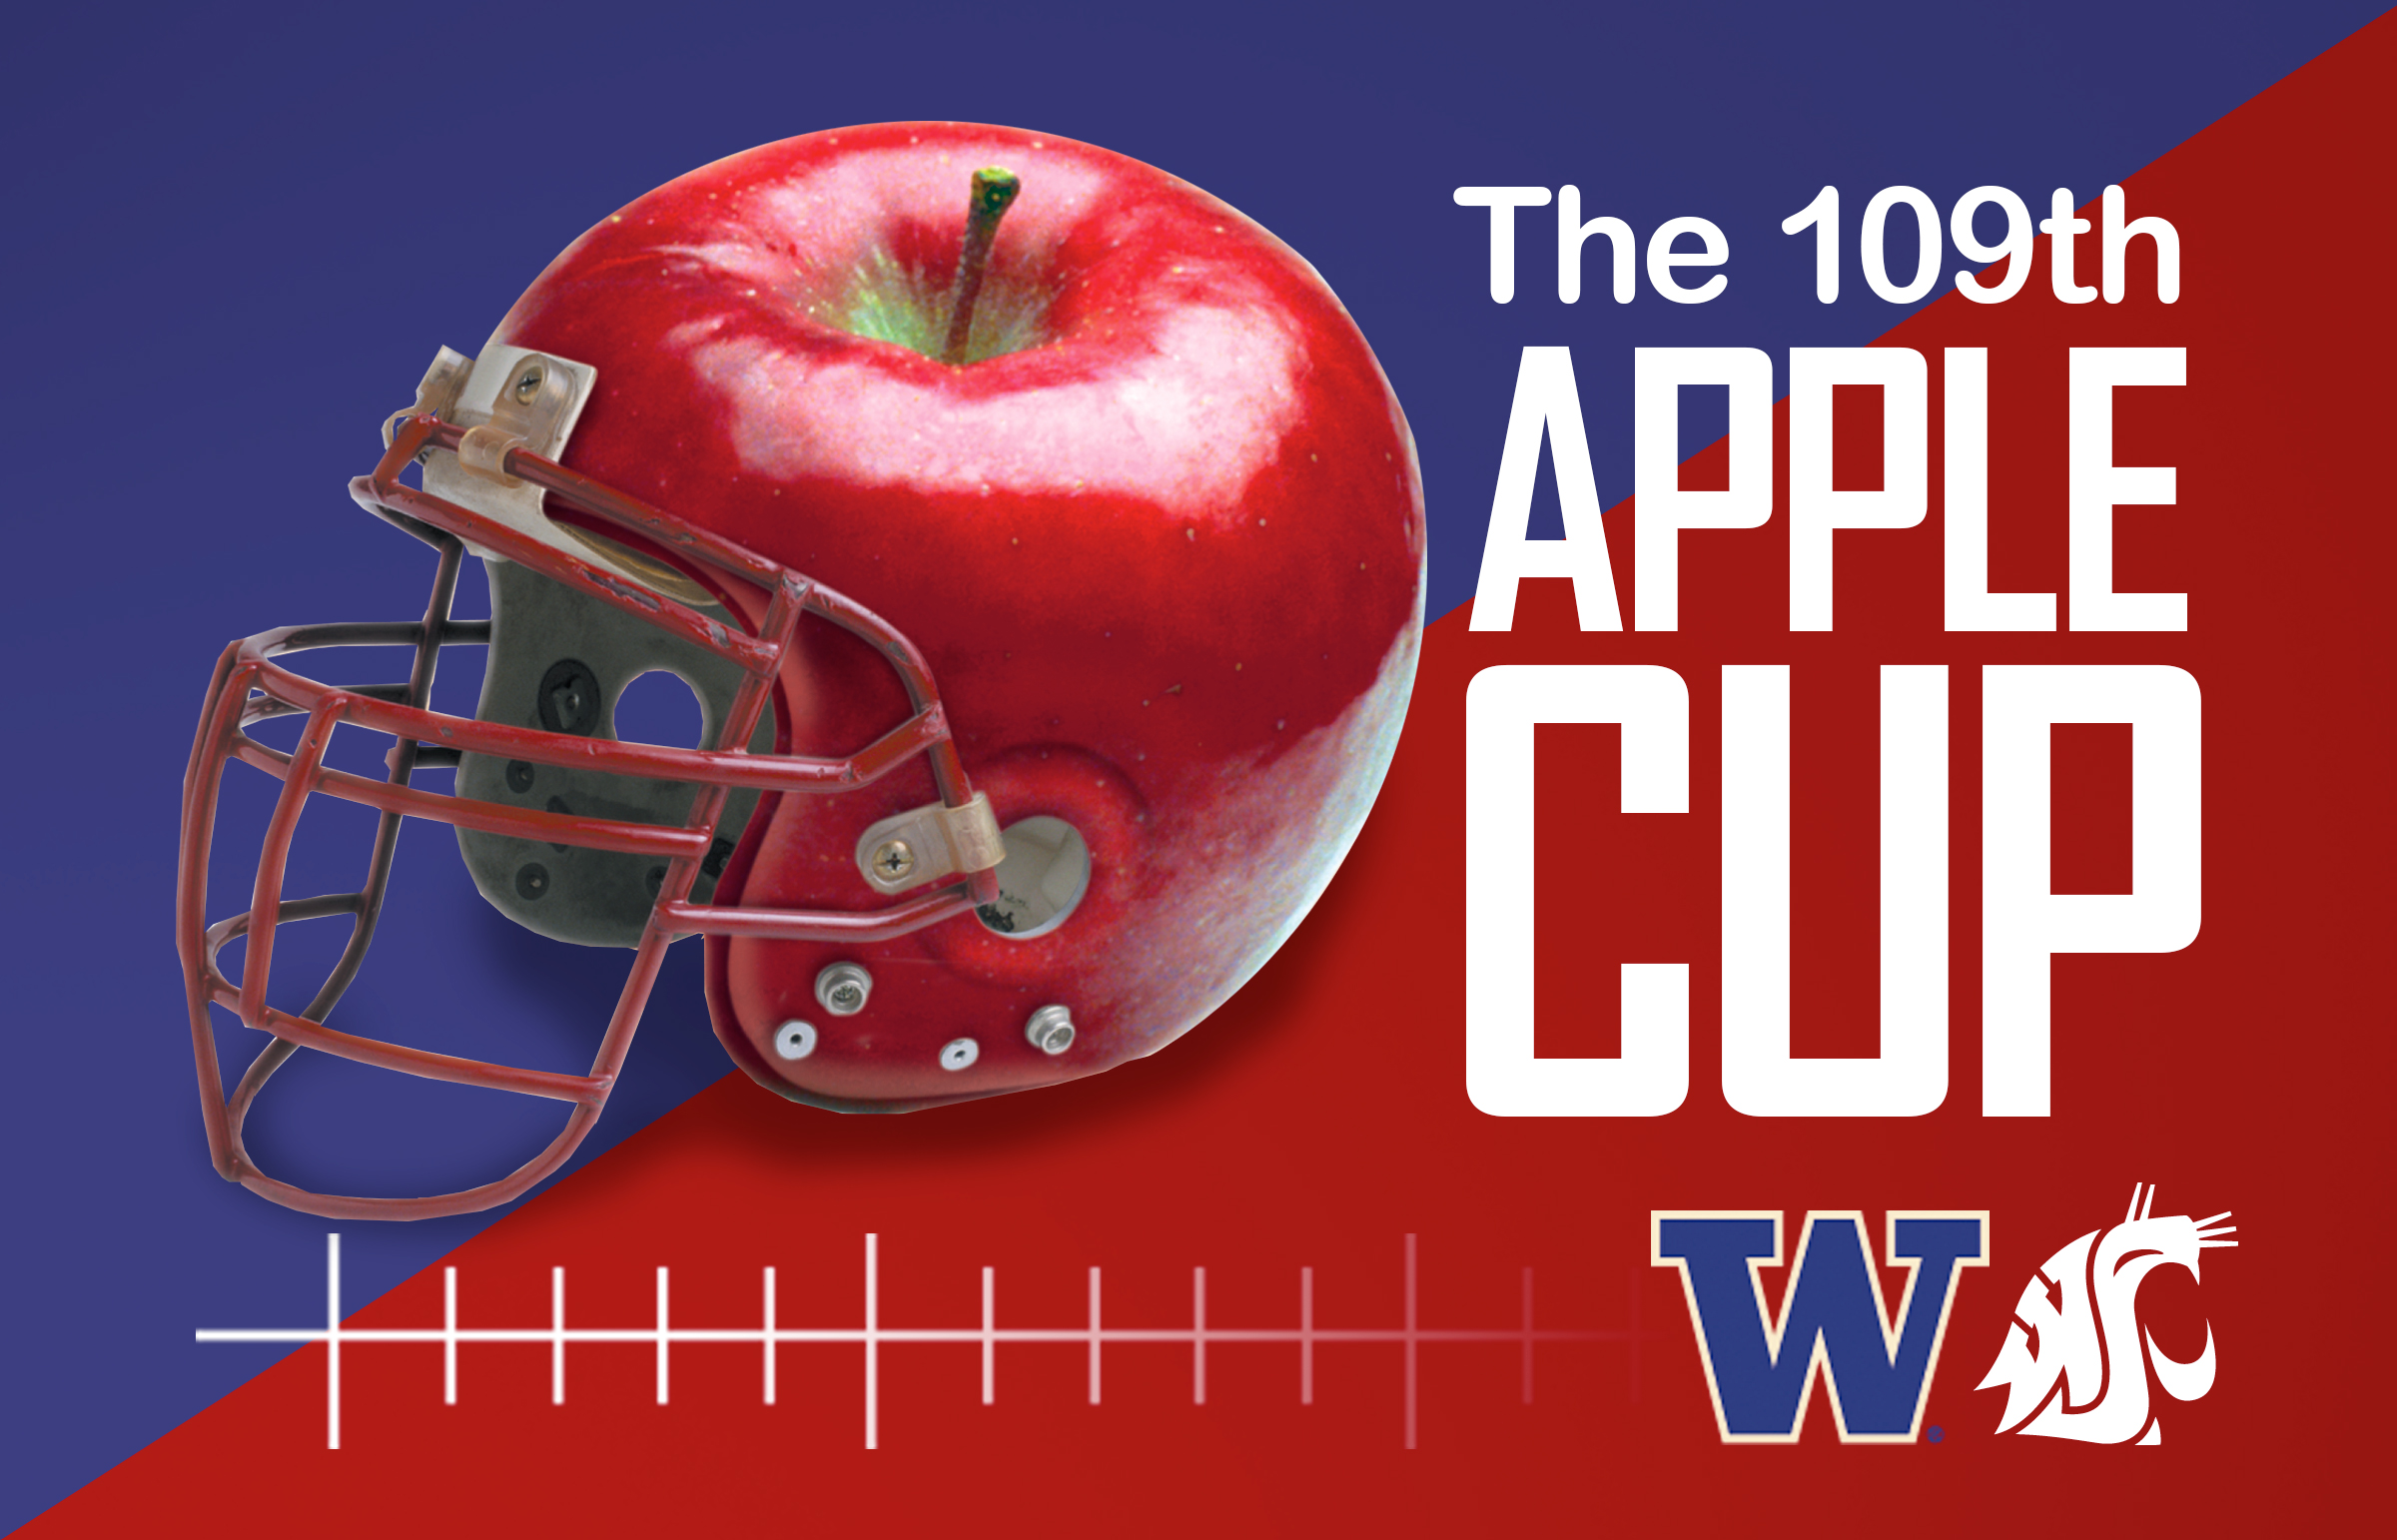 What's your favorite Apple Cup memory?